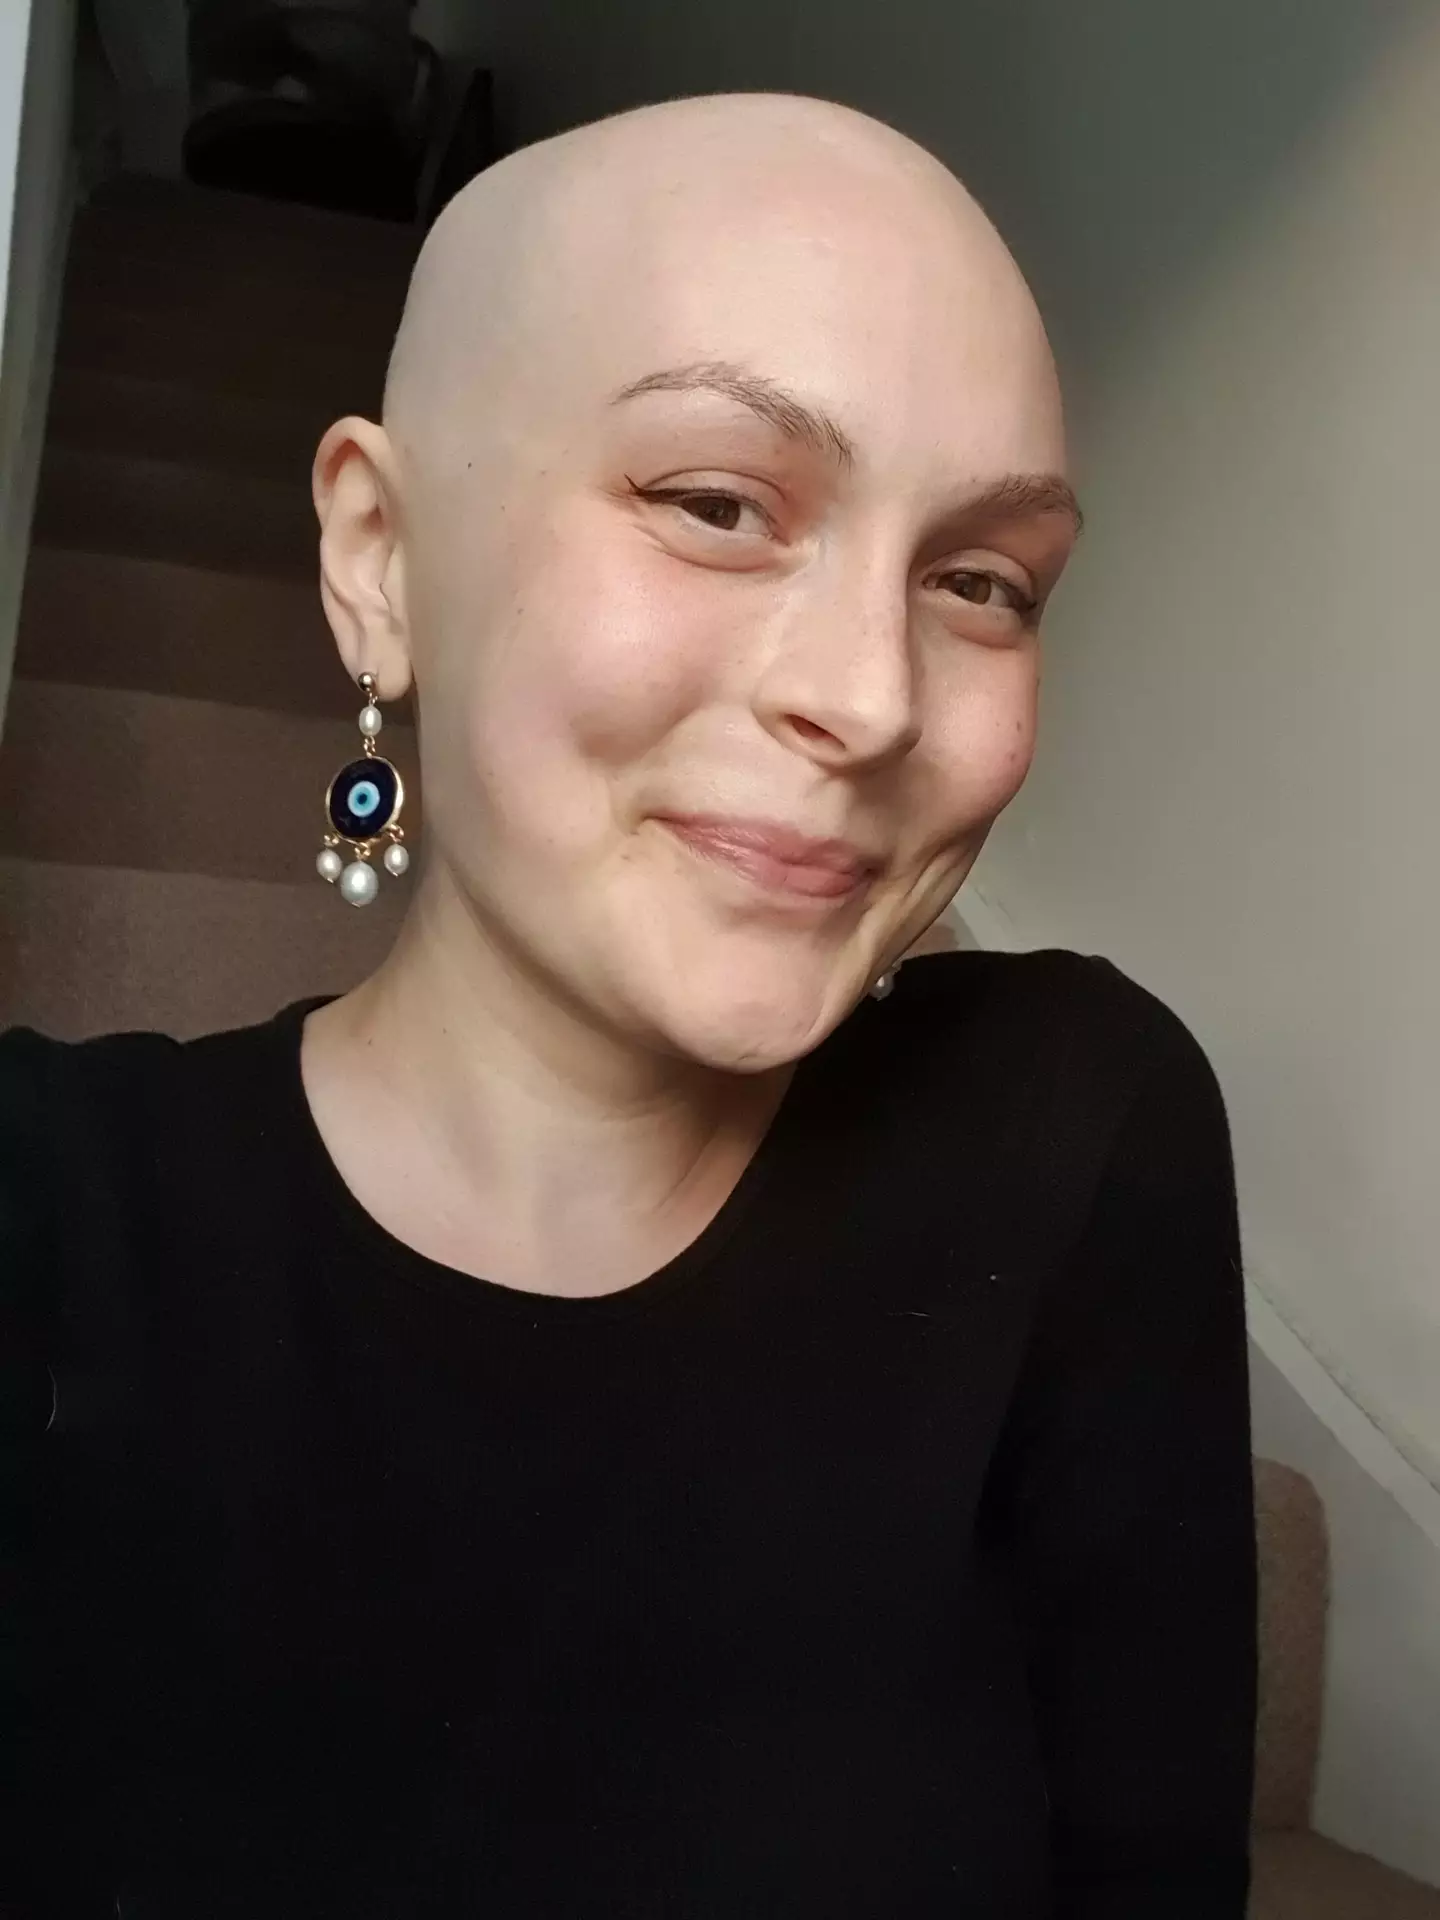 Chloe started chemotherapy as soon as she was diagnosed.